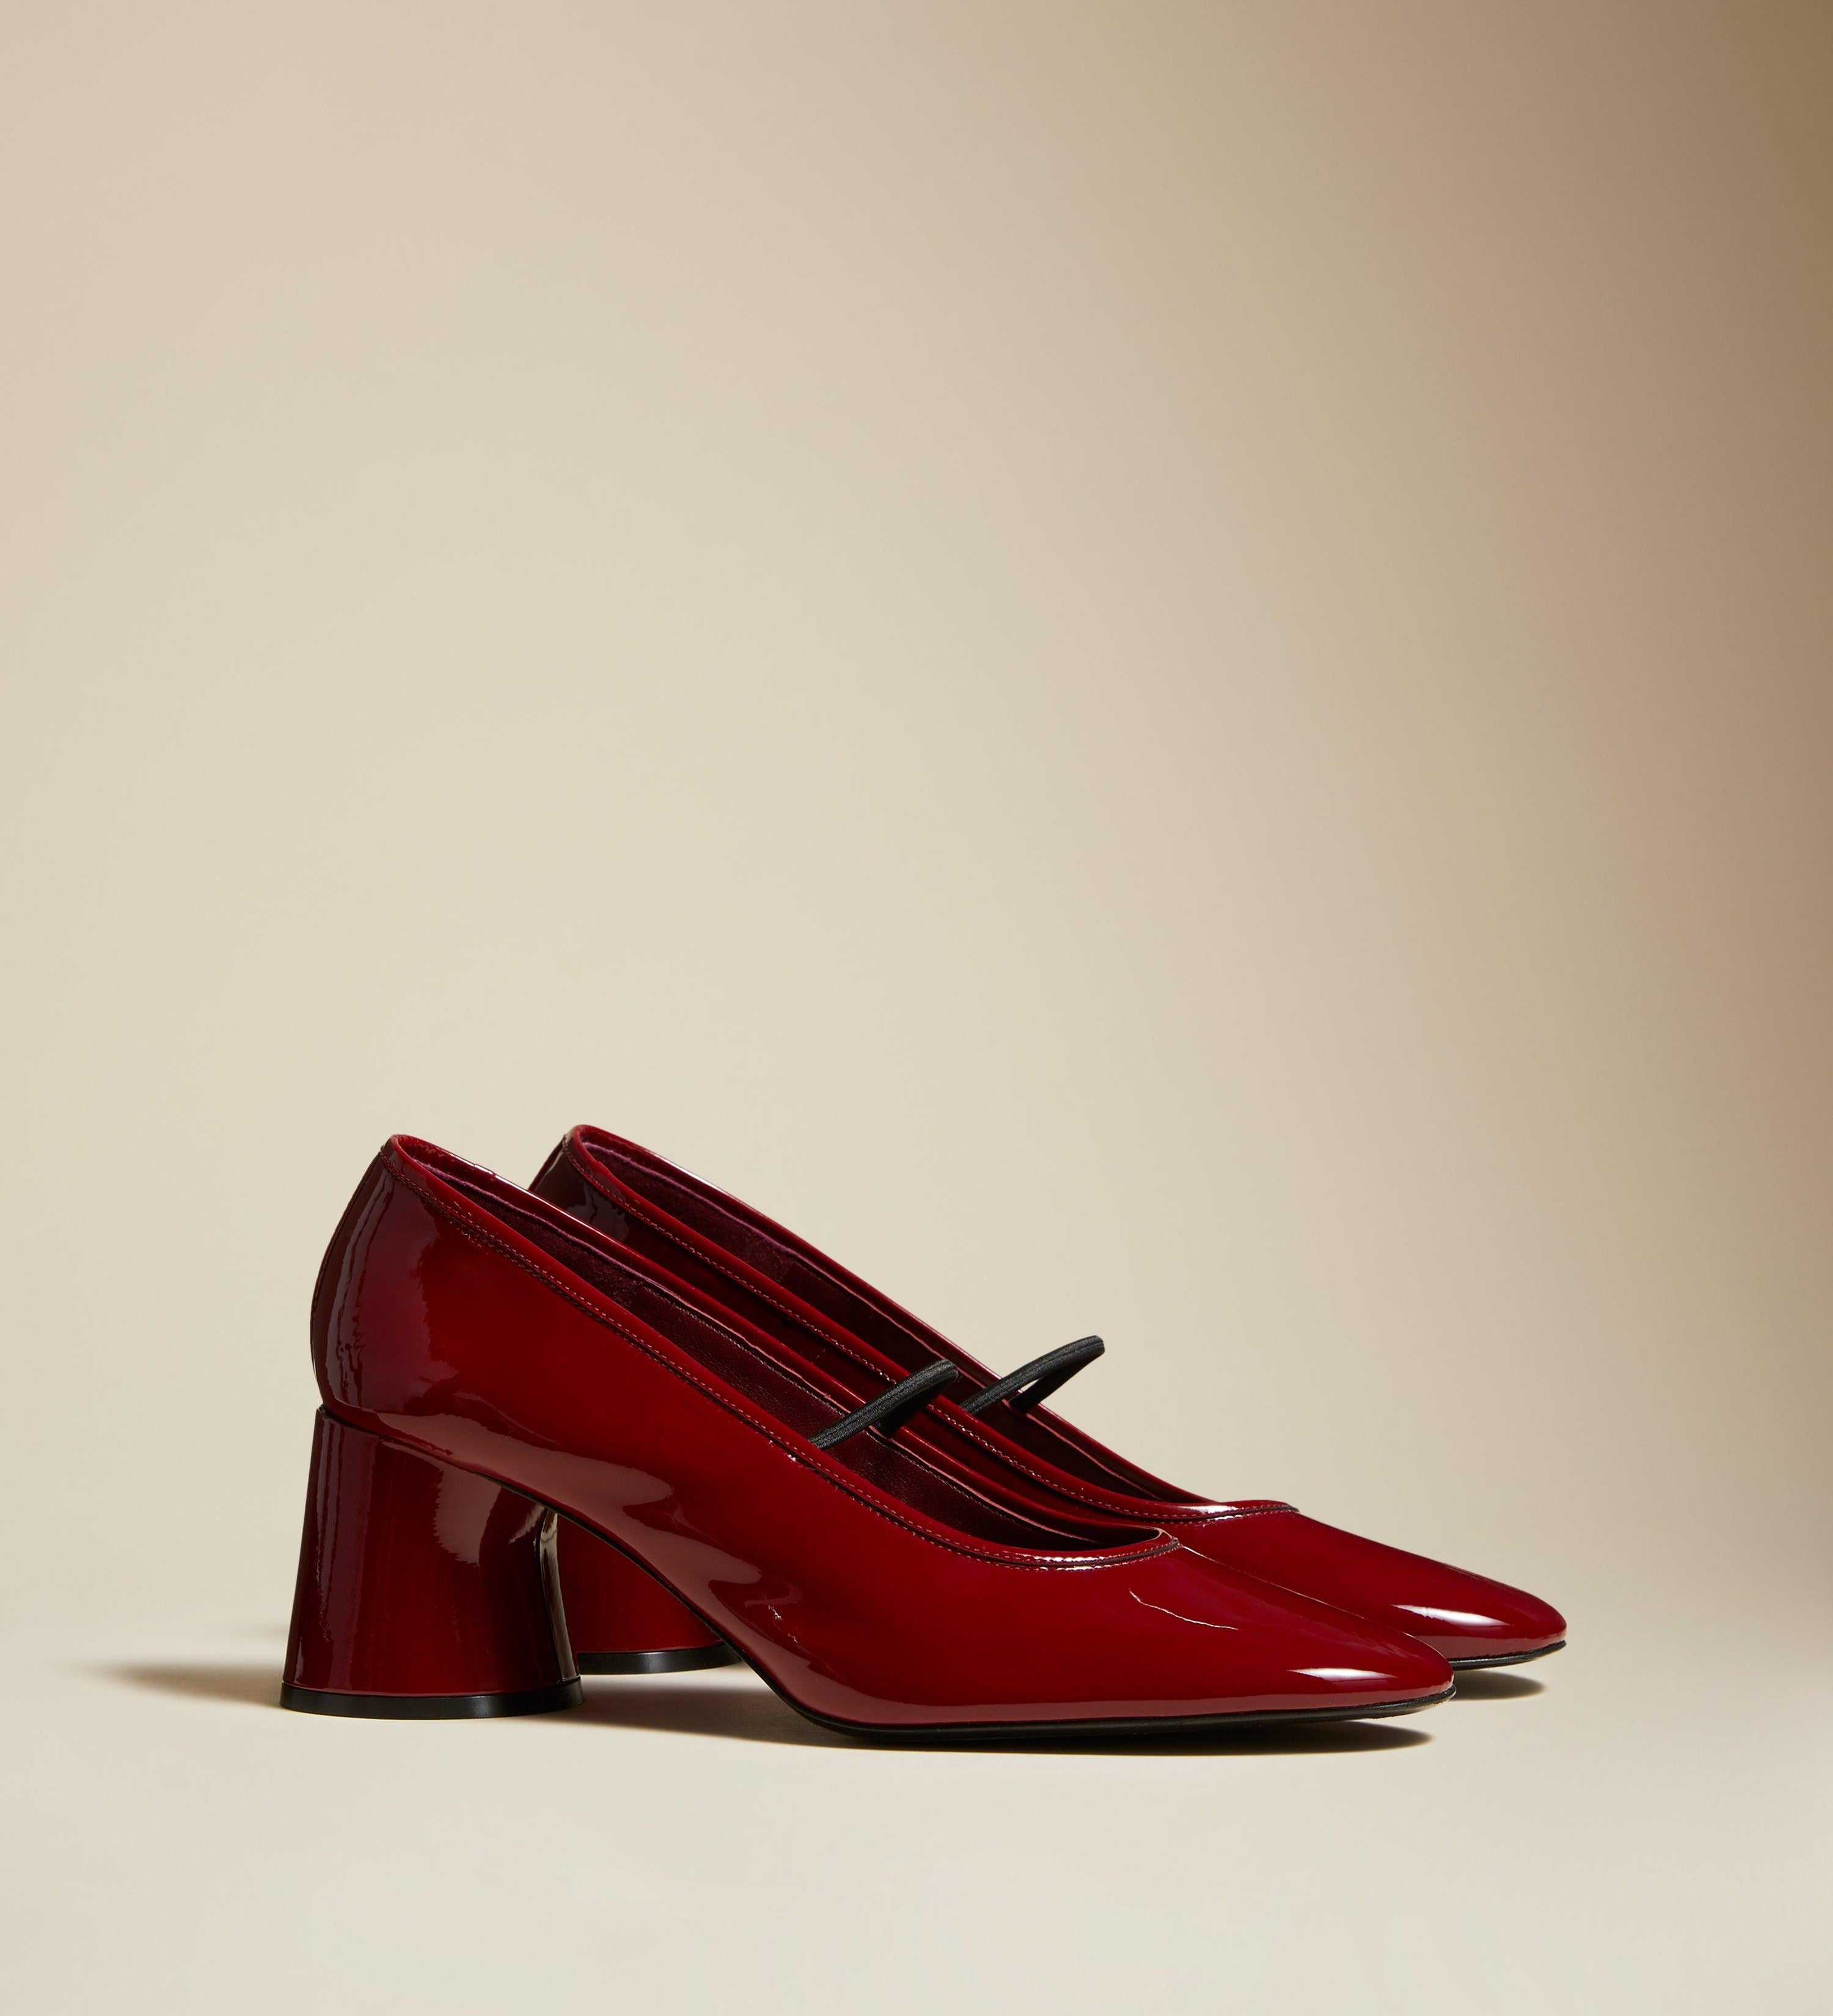 The Lorimer Pump in Deep Red Patent Leather - The Iconic Issue